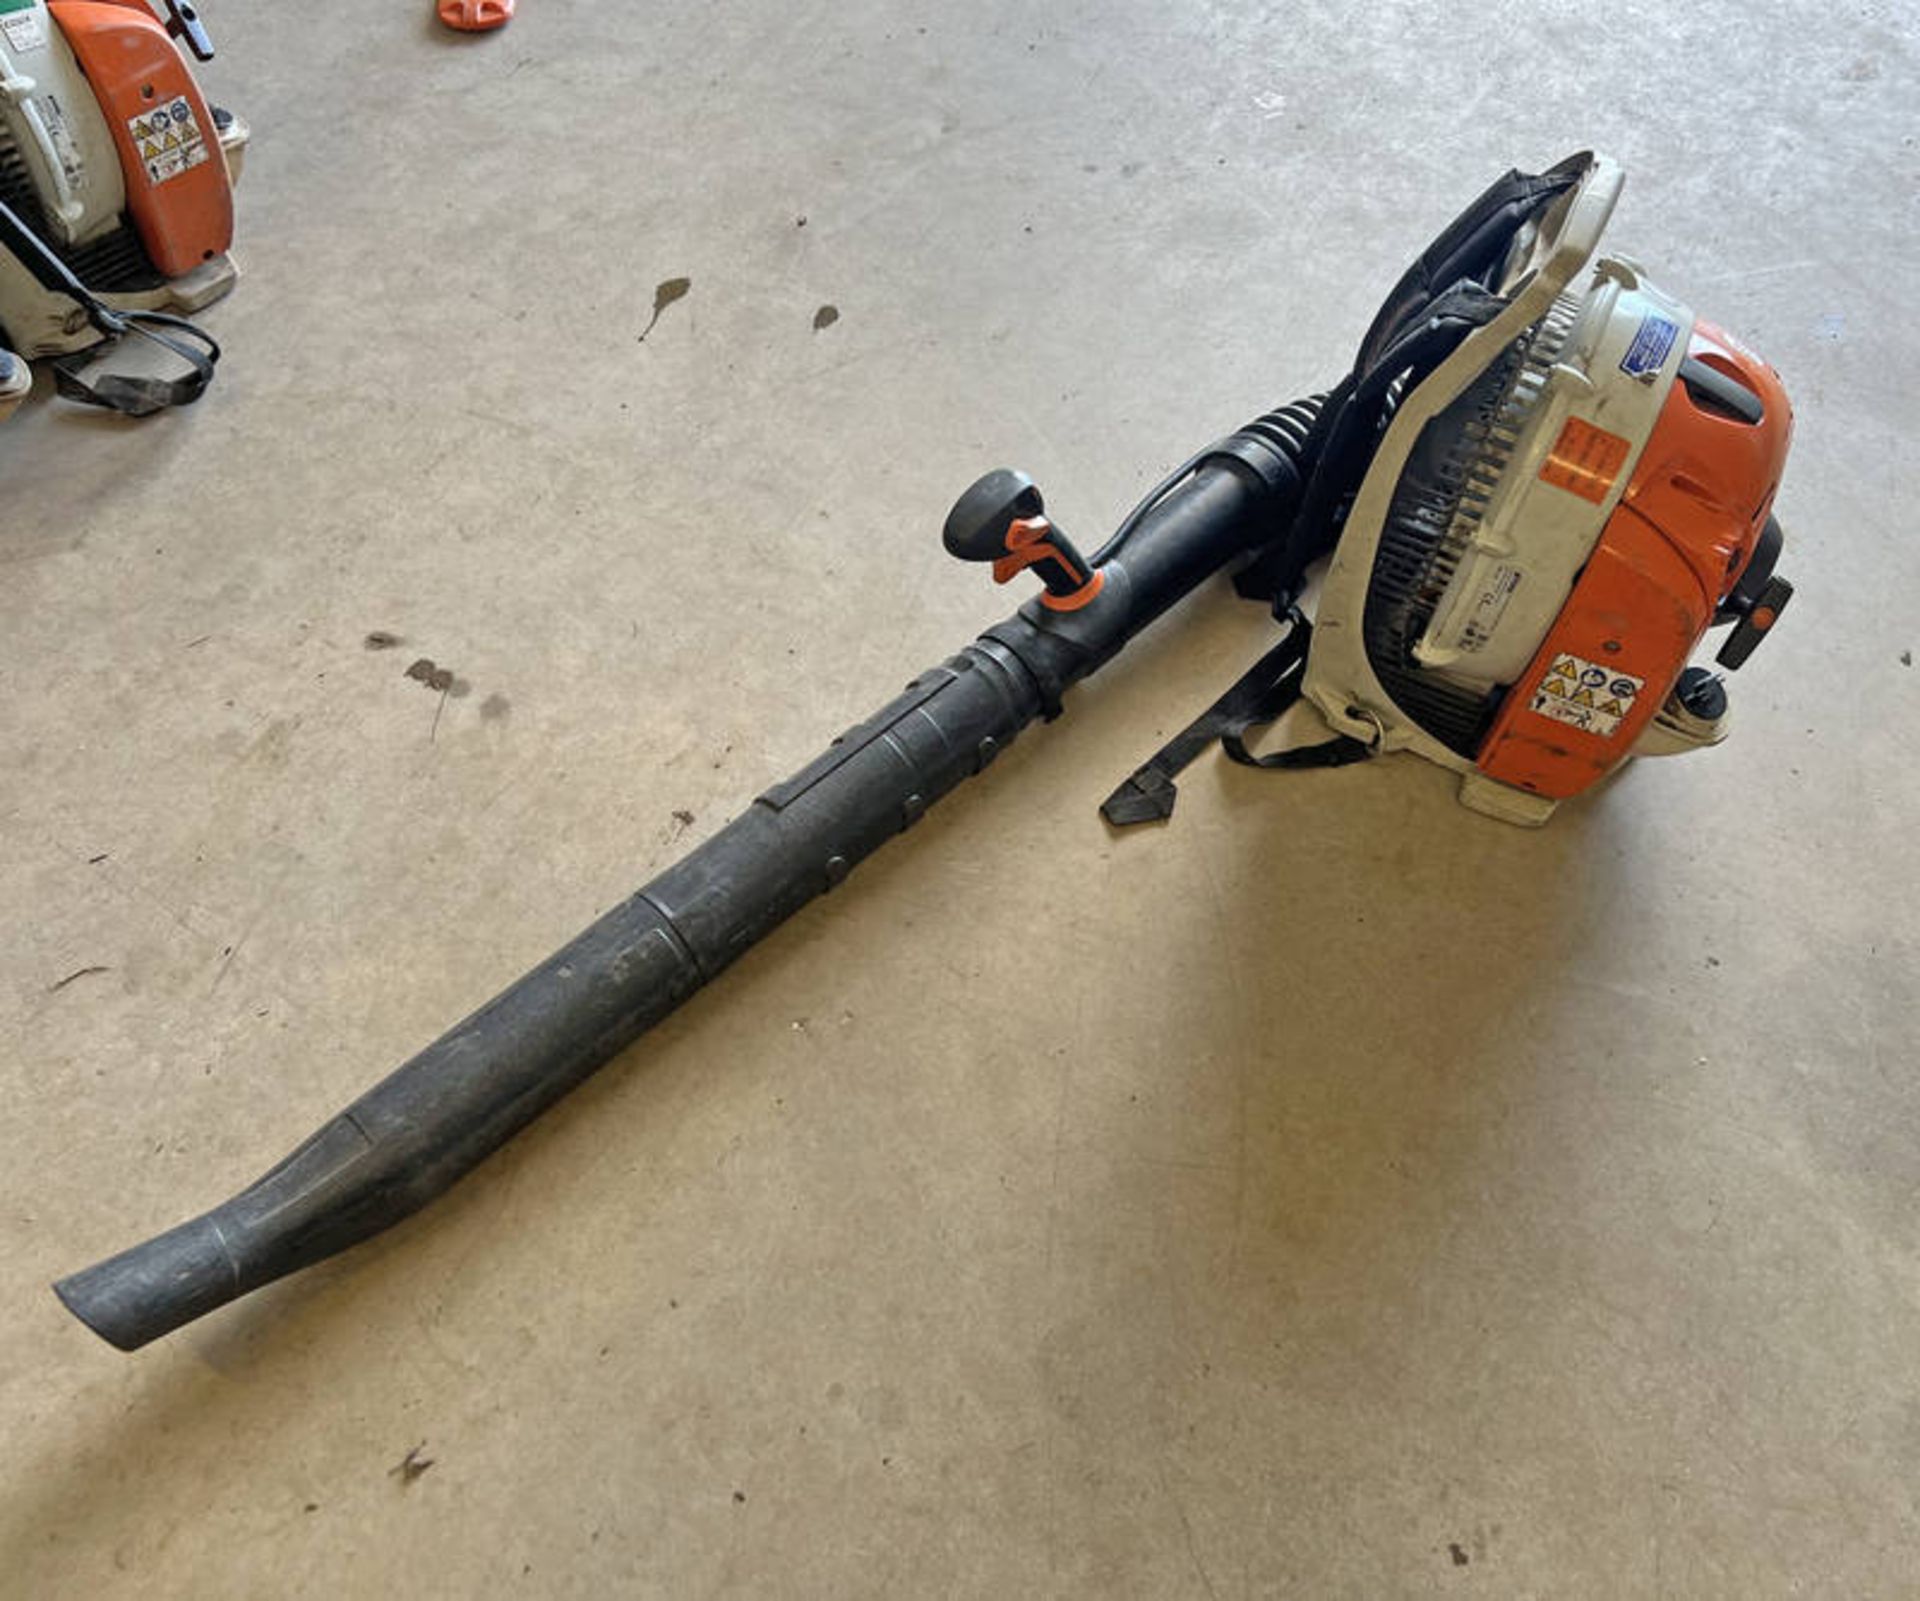 2019 STIHL BLOWER BR380 C-E 56CC BACK PACK LEAF BLOWER **TO BE SOLD PLUS VAT ON THE HAMMER**